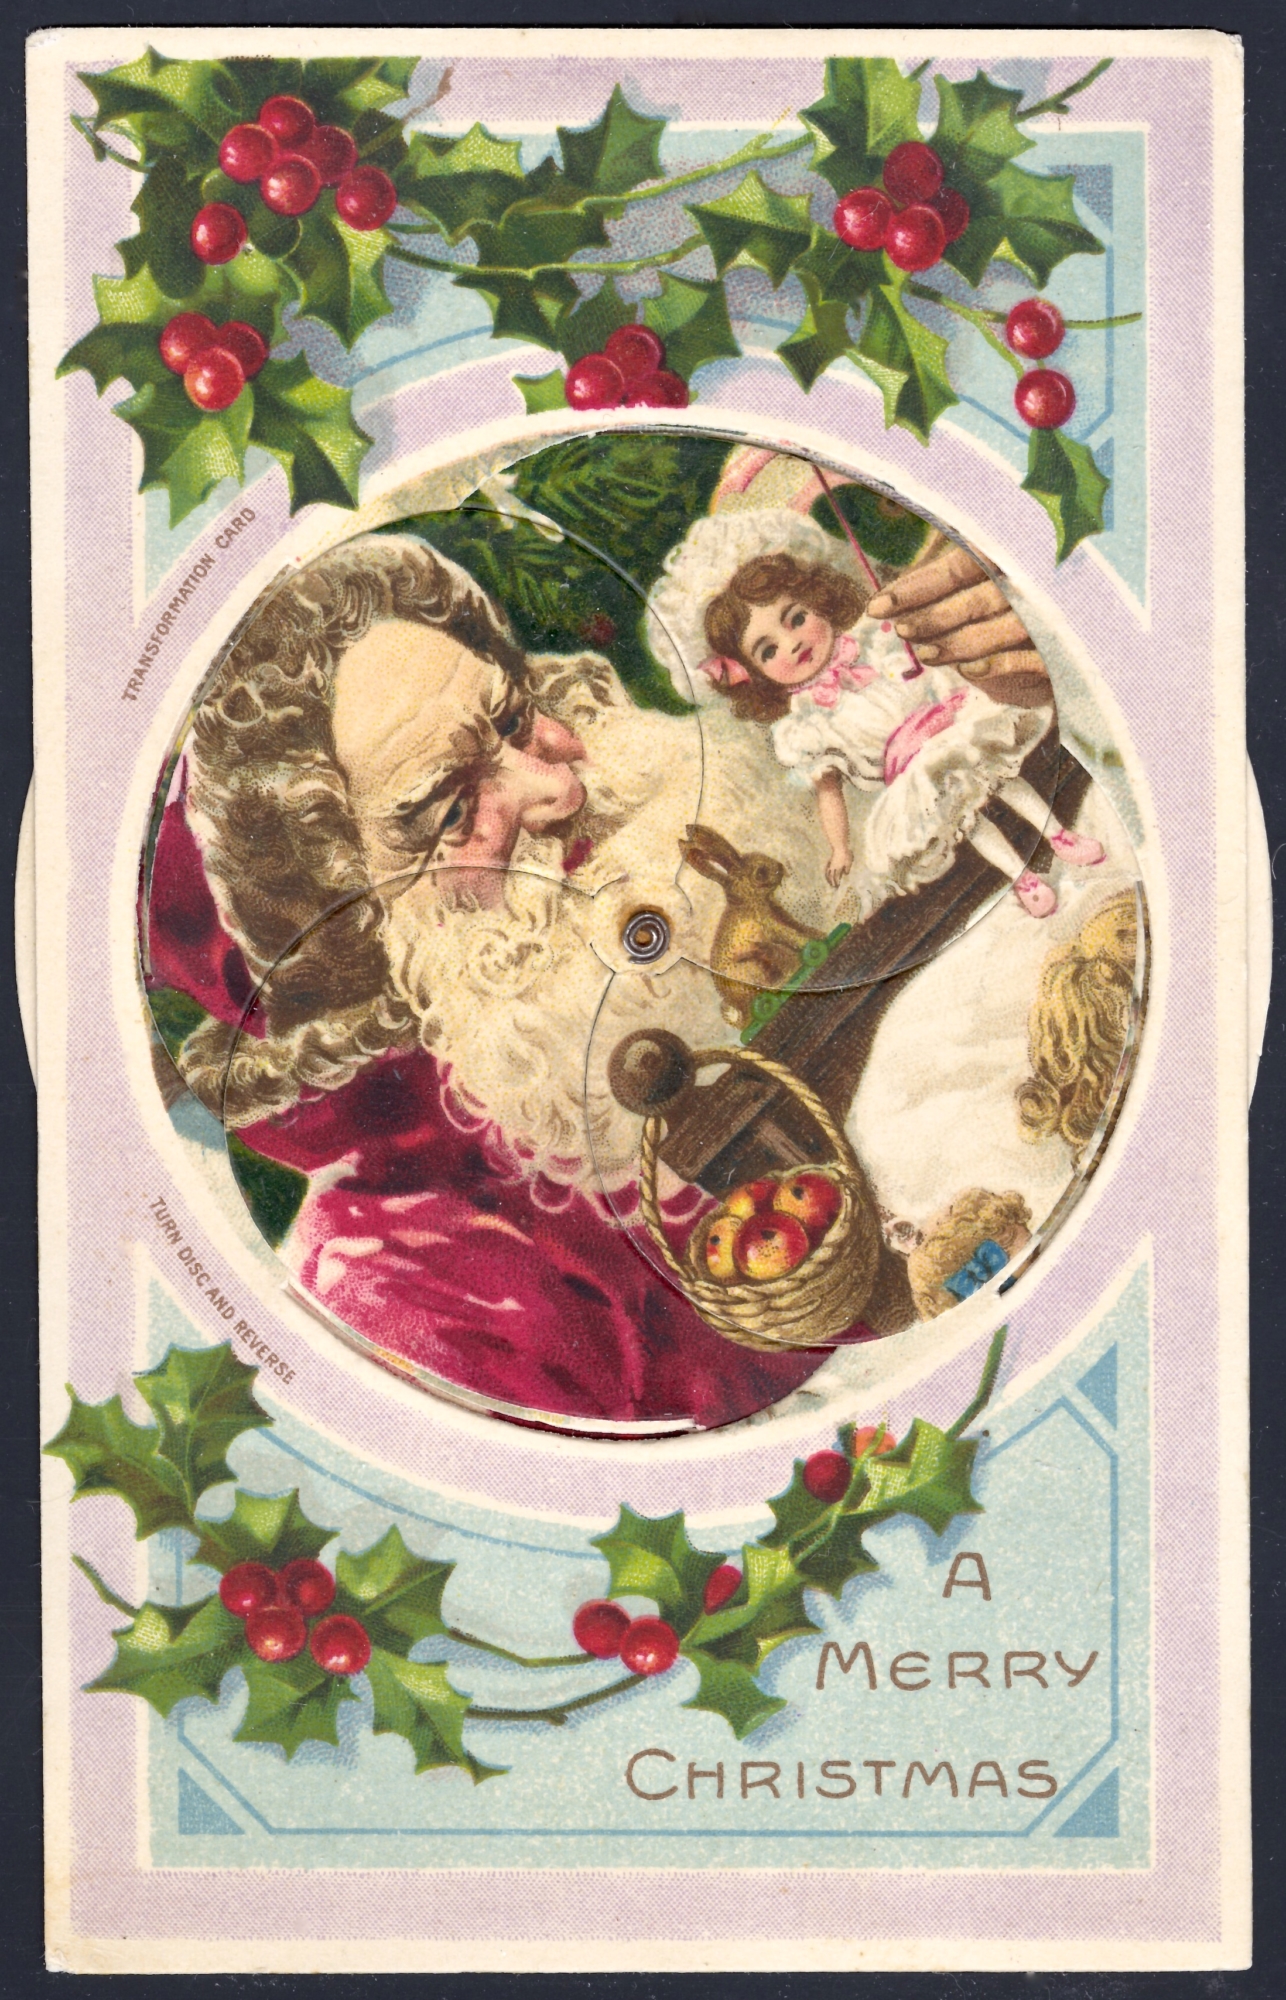 Santa wearing a red robe. Lithographed in Germany (flat; mechanical)